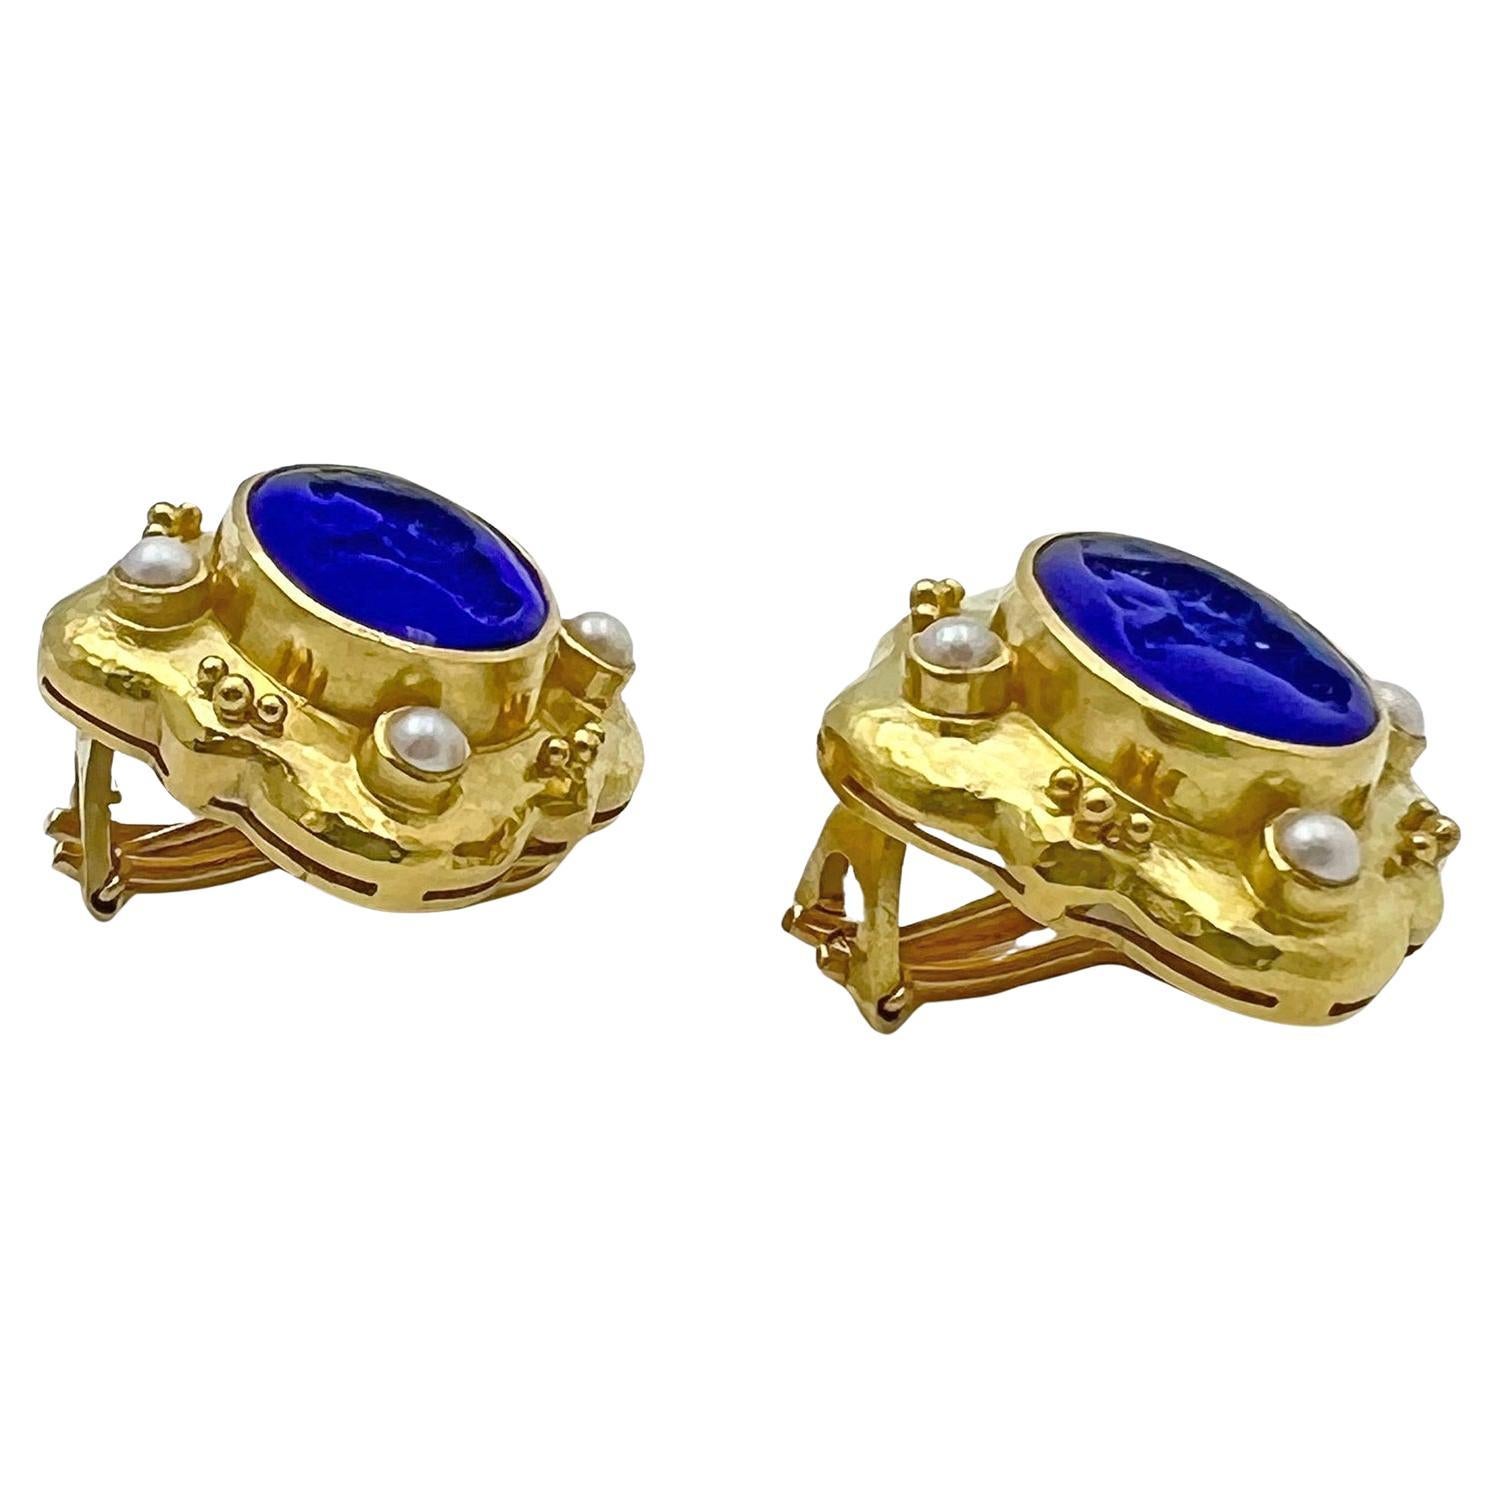 Elizabeth Locke handmade 19k yellow gold earrings, each centering a bezel-set dark blue Venetian glass intaglio motif of a bear, further accented by small cultured pearl accents at the cardinal points. Mother-of-pearl backs the intaglios. Omega clip